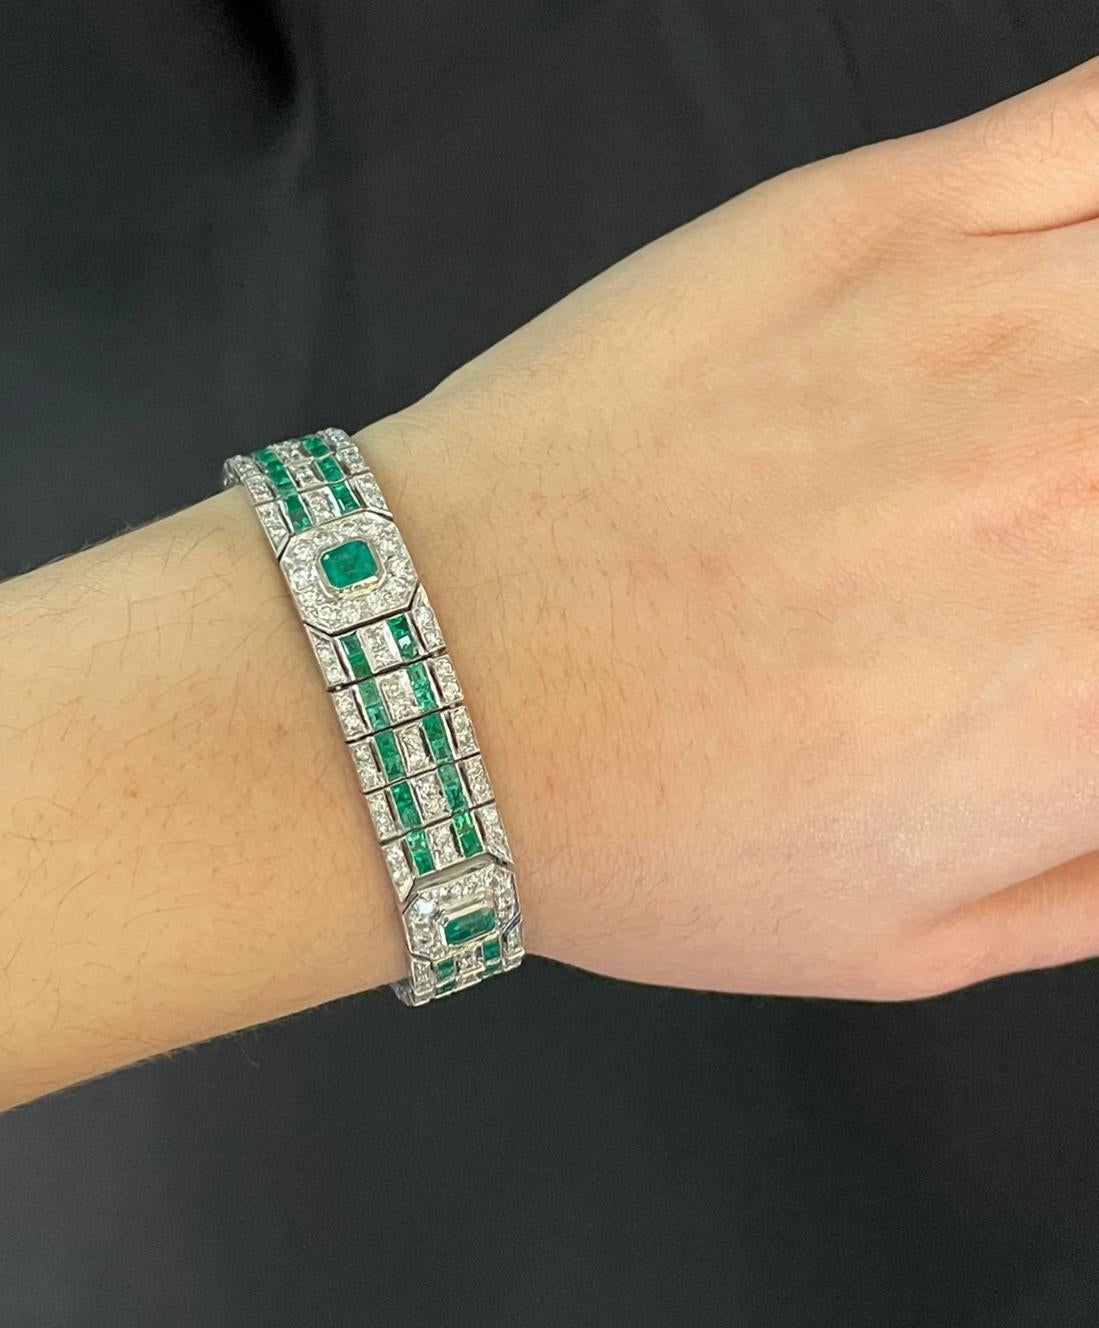 Art Deco Emerald and Diamond Bracelet

White gold art deco bracelet set with two rows of emeralds and round cut diamonds. 

Approximate Emerald Weight: 7.25
Approximate Diamond Weight: 4.15
Metal Type: 18 Karat White Gold